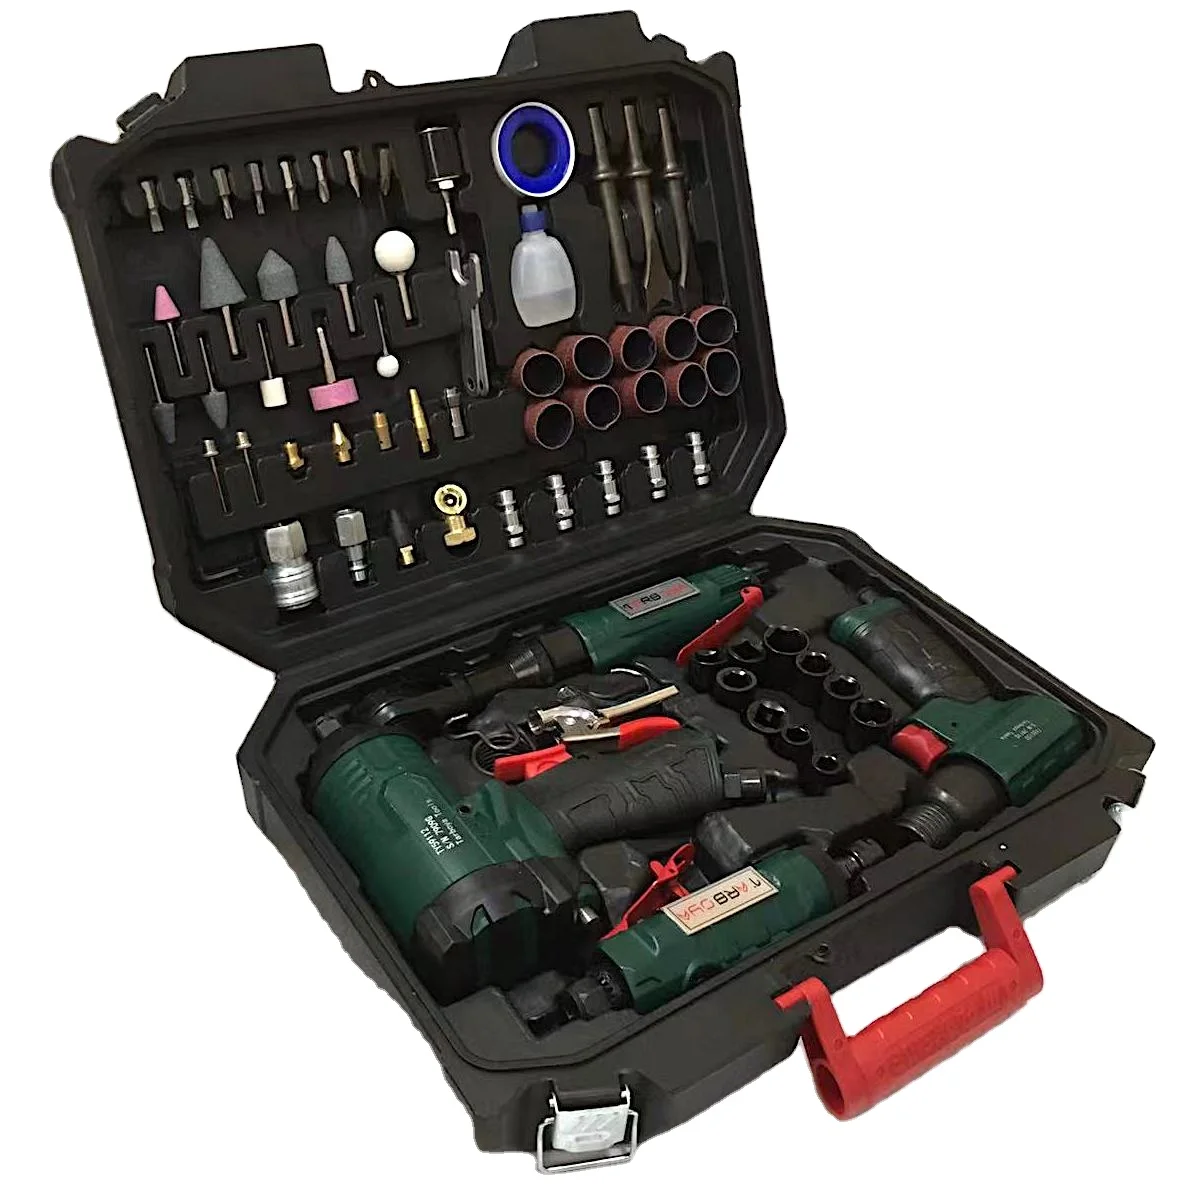 

TY00071 Tarboya 71 piece Pneumatic Tools Kit for auto repairing includes wrench, ratchet, air hammer, die grinder and accessary